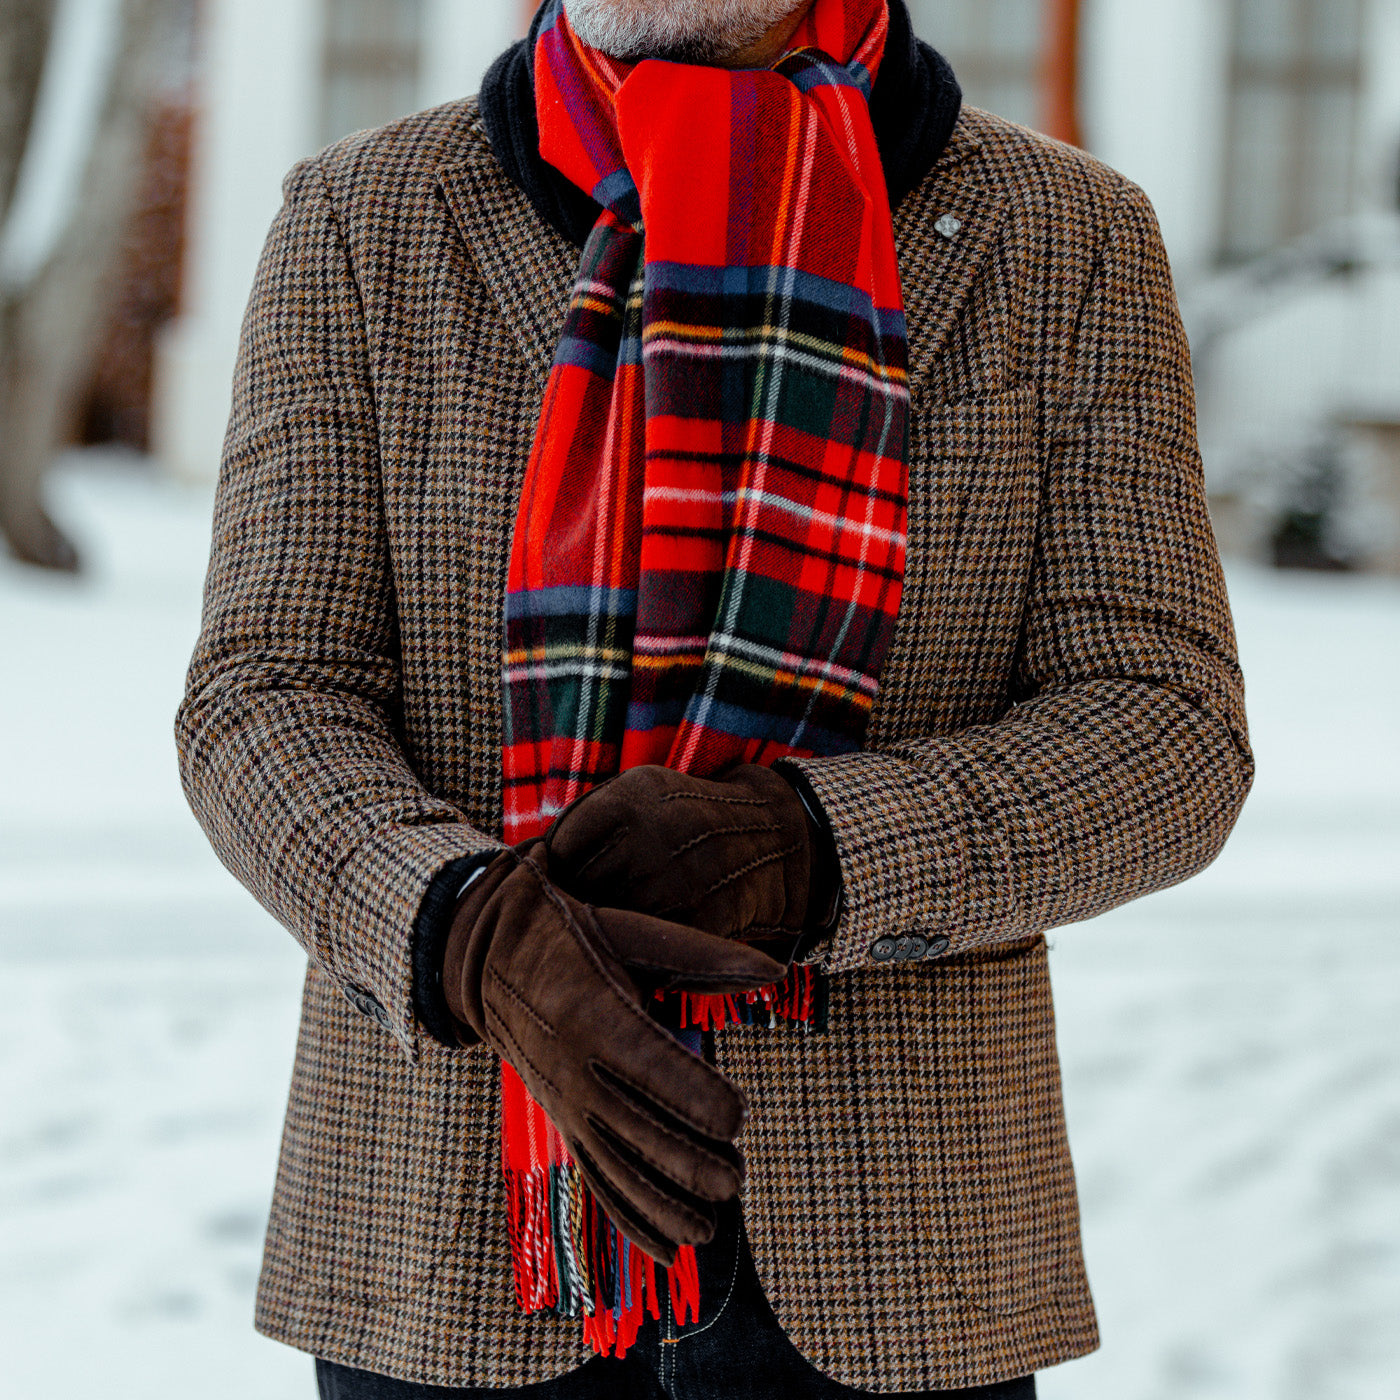 A man wearing a Red Checked Royal Stewart Cashmere Scarf by Johnstons of Elgin.